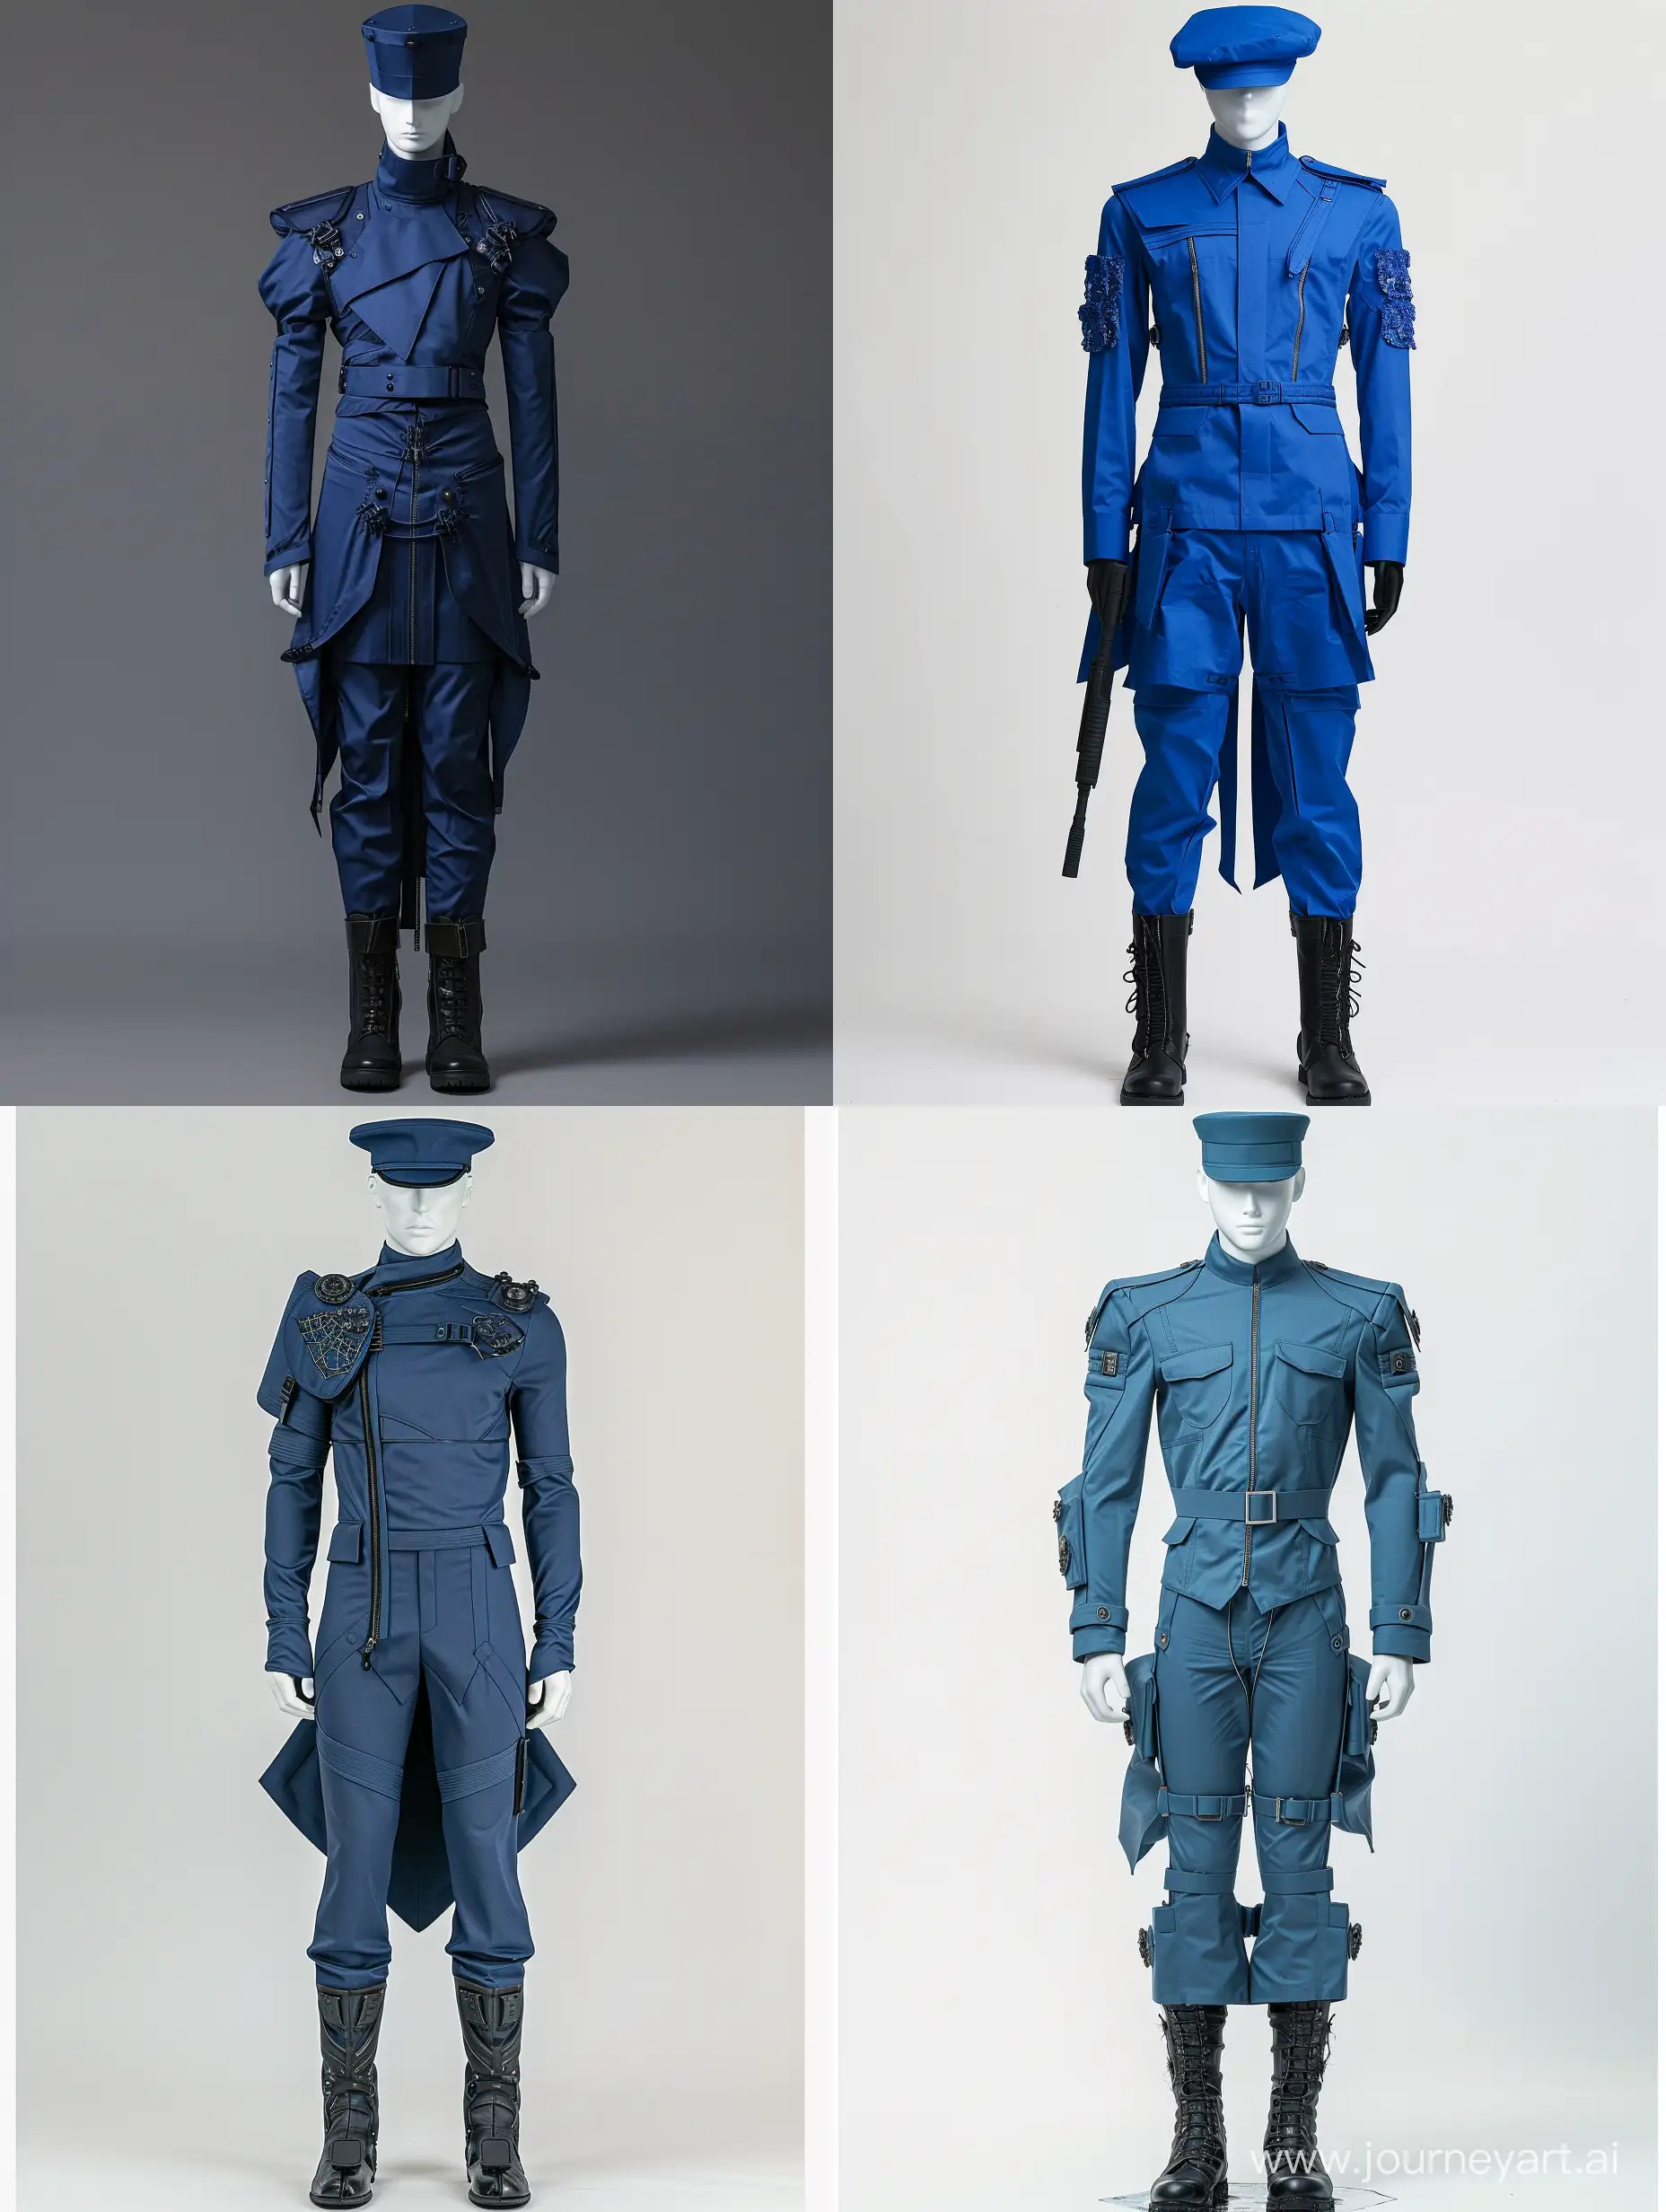 Male Mannequin, No Face, Retro Futuristic Style, Cyberpunk Style, Futuristic Military Blue Formal Formal Cap, Futuristic Military Blue Formal Formal Uniform, Zipper, High Collar, Long Sleeves, Epaulettes, Decorative Elements, Blue Formal Formal Pants, Tall Black Boots